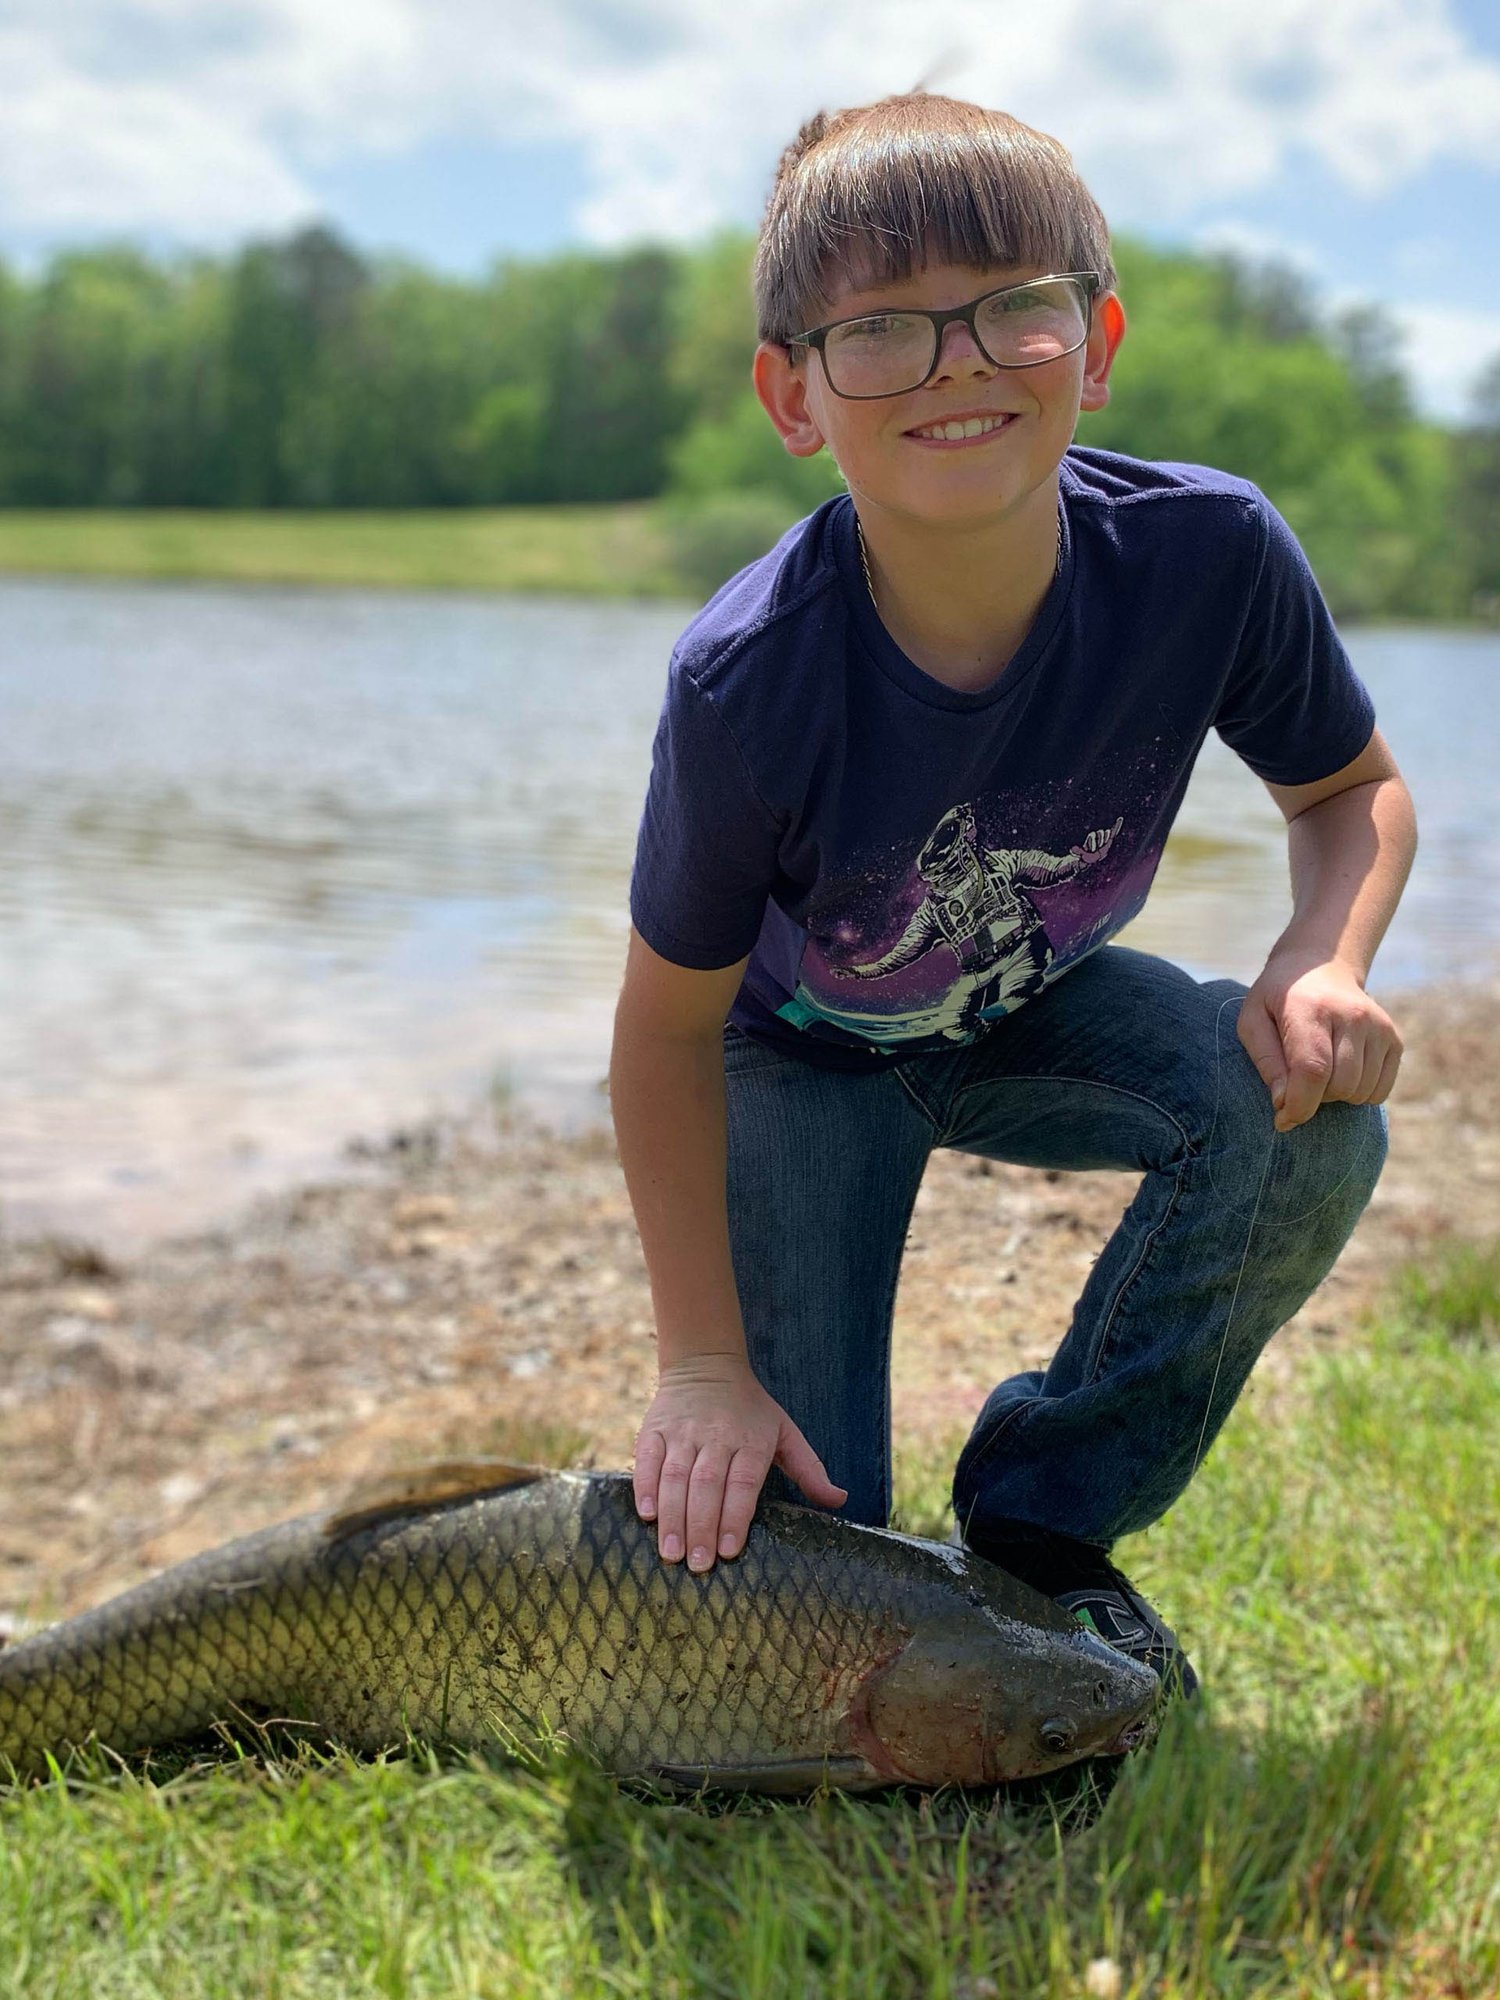 Elijah and his lucky catch